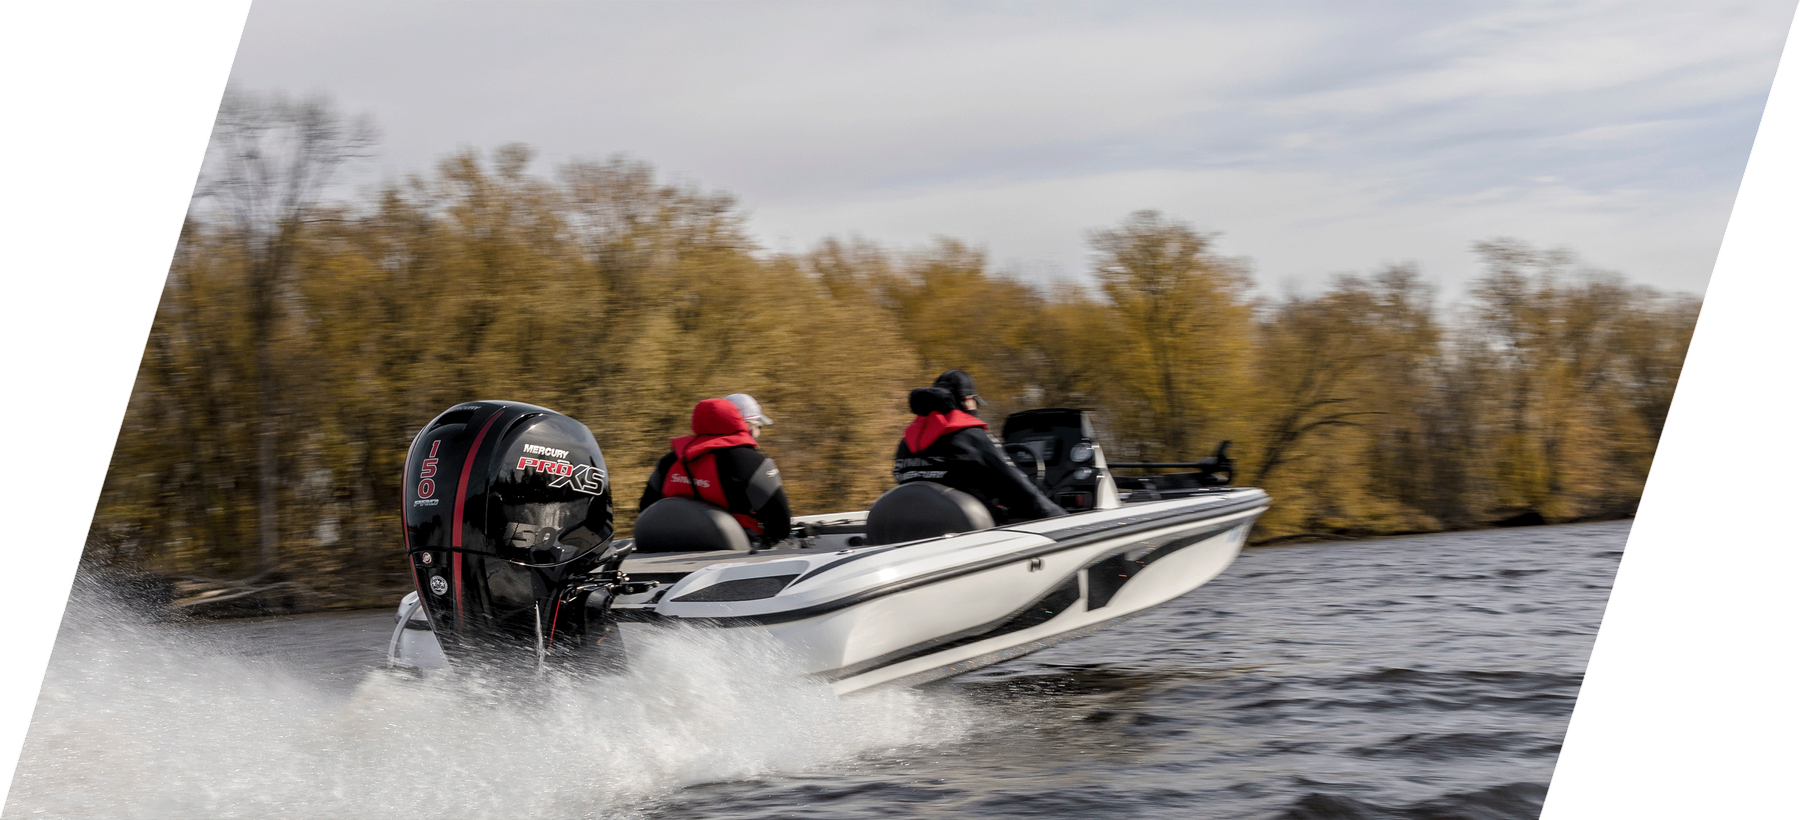 Mercury Pro XS outboards